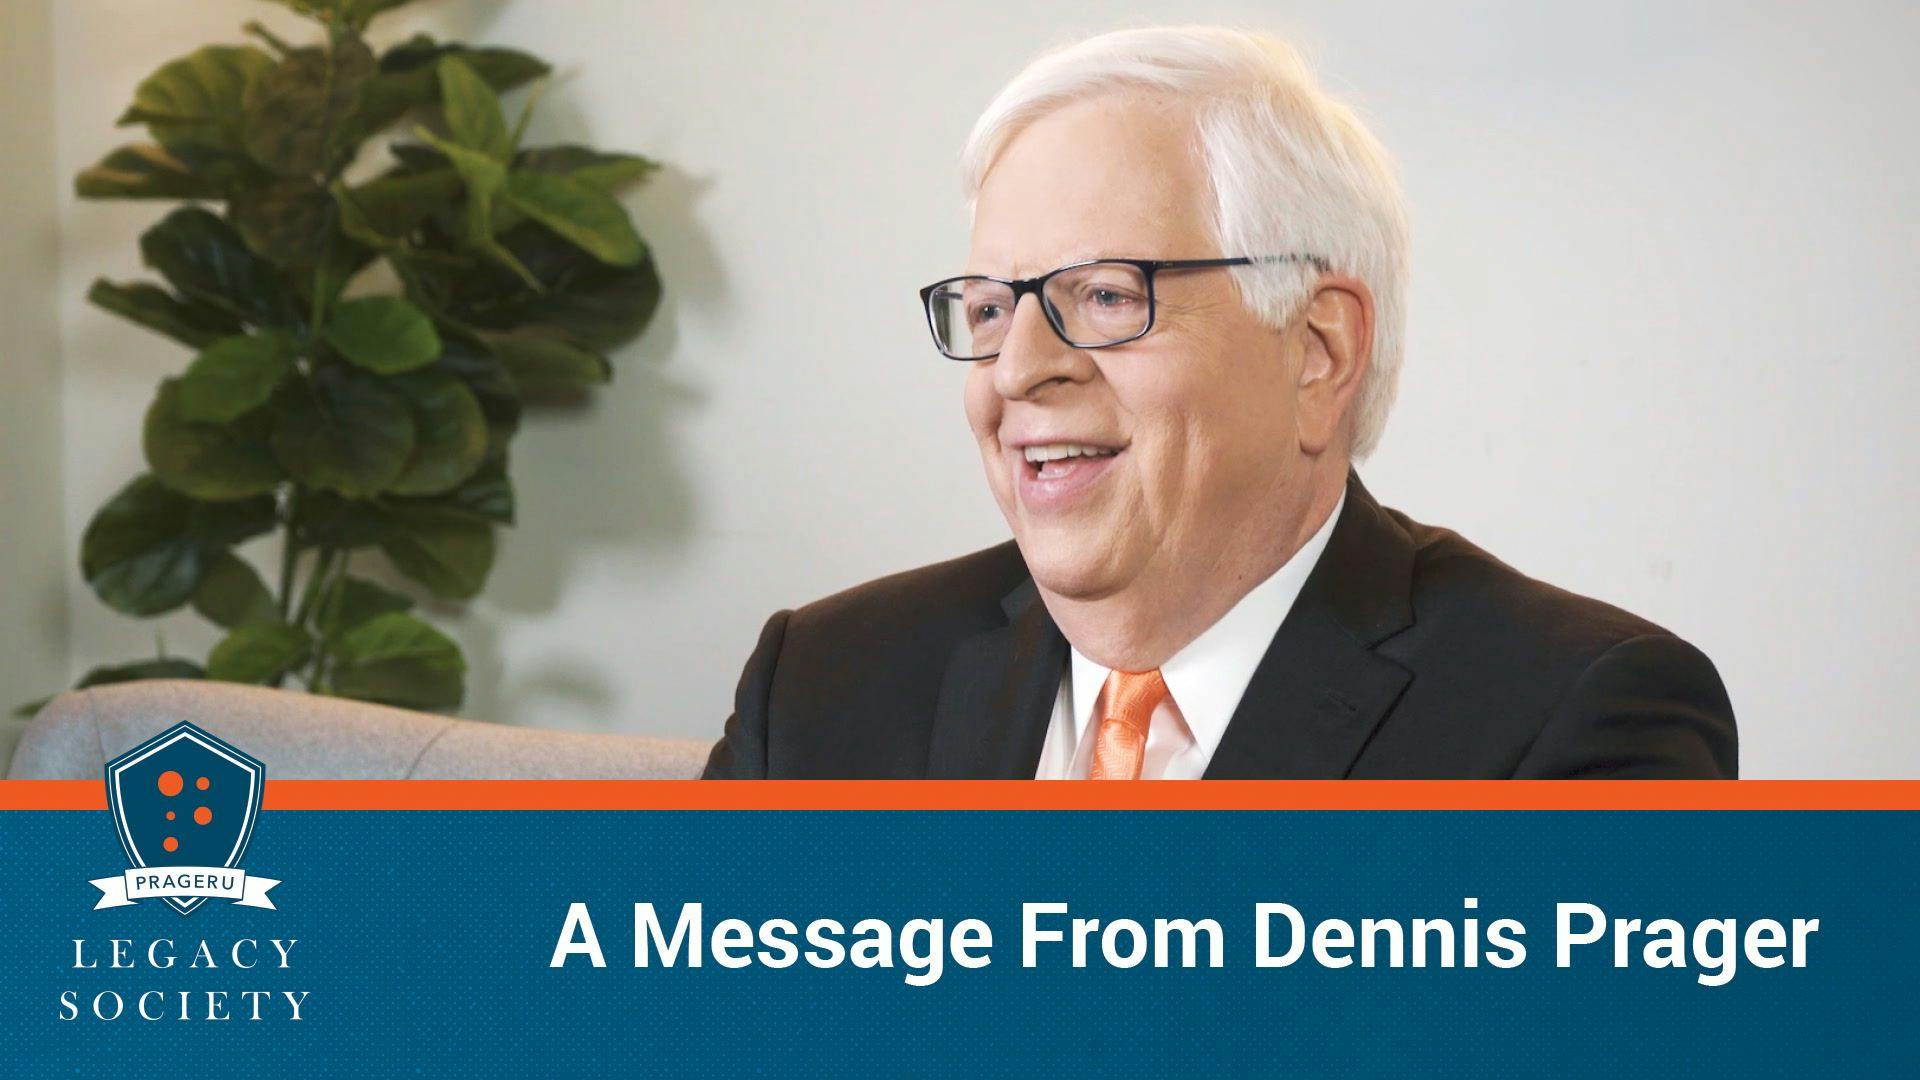 A Message From Dennis Prager